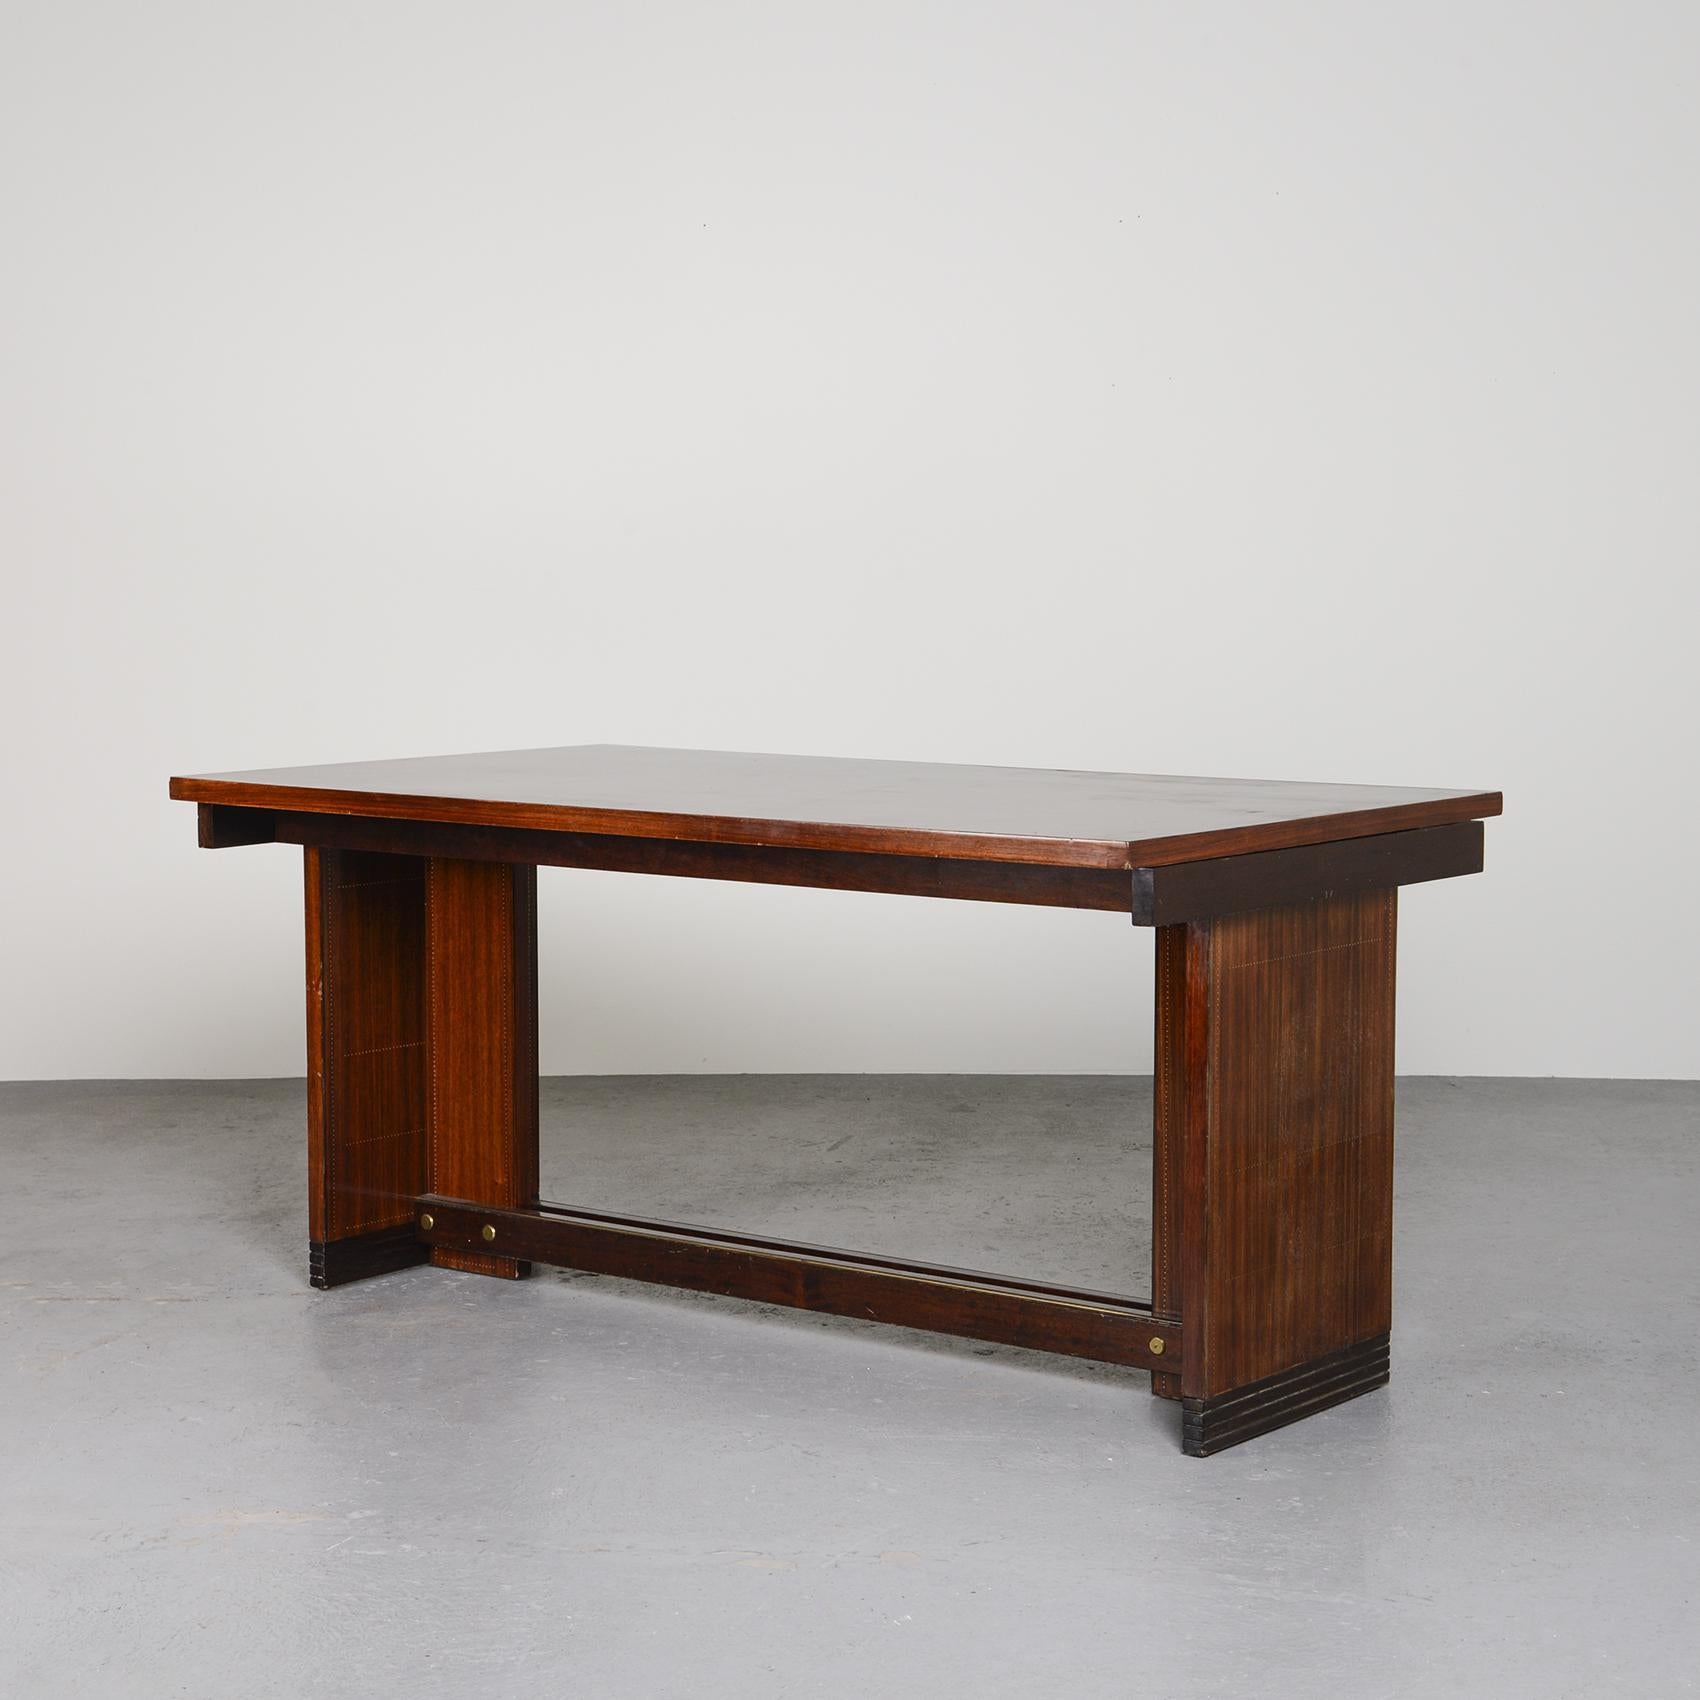 Dining table dating back to the 1930s, perfectly embodying the exceptional craftsmanship of Atelier Sornay with its refined design and quality materials.

Crafted entirely in rosewood veneer, it rests upon two sled-style side legs connected by a